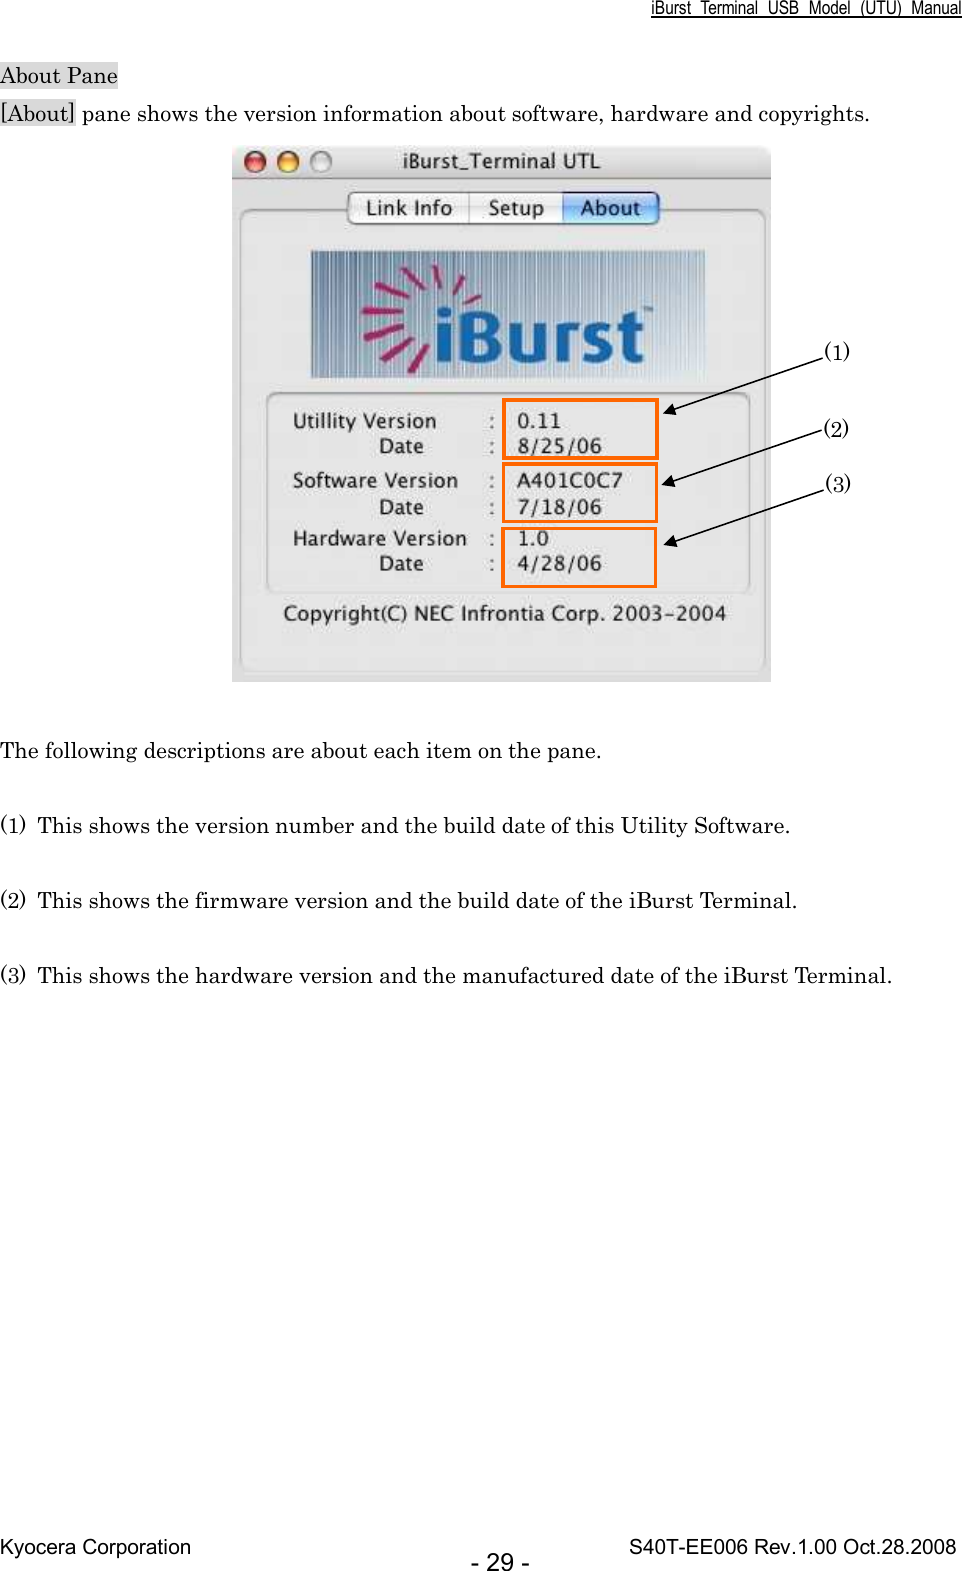 iBurst  Terminal  USB  Model  (UTU)  Manual Kyocera Corporation                                                                                    S40T-EE006 Rev.1.00 Oct.28.2008 - 29 - About Pane [About] pane shows the version information about software, hardware and copyrights.   The following descriptions are about each item on the pane.  (1) This shows the version number and the build date of this Utility Software.  (2) This shows the firmware version and the build date of the iBurst Terminal.  (3) This shows the hardware version and the manufactured date of the iBurst Terminal.  (1) (2) (3) 